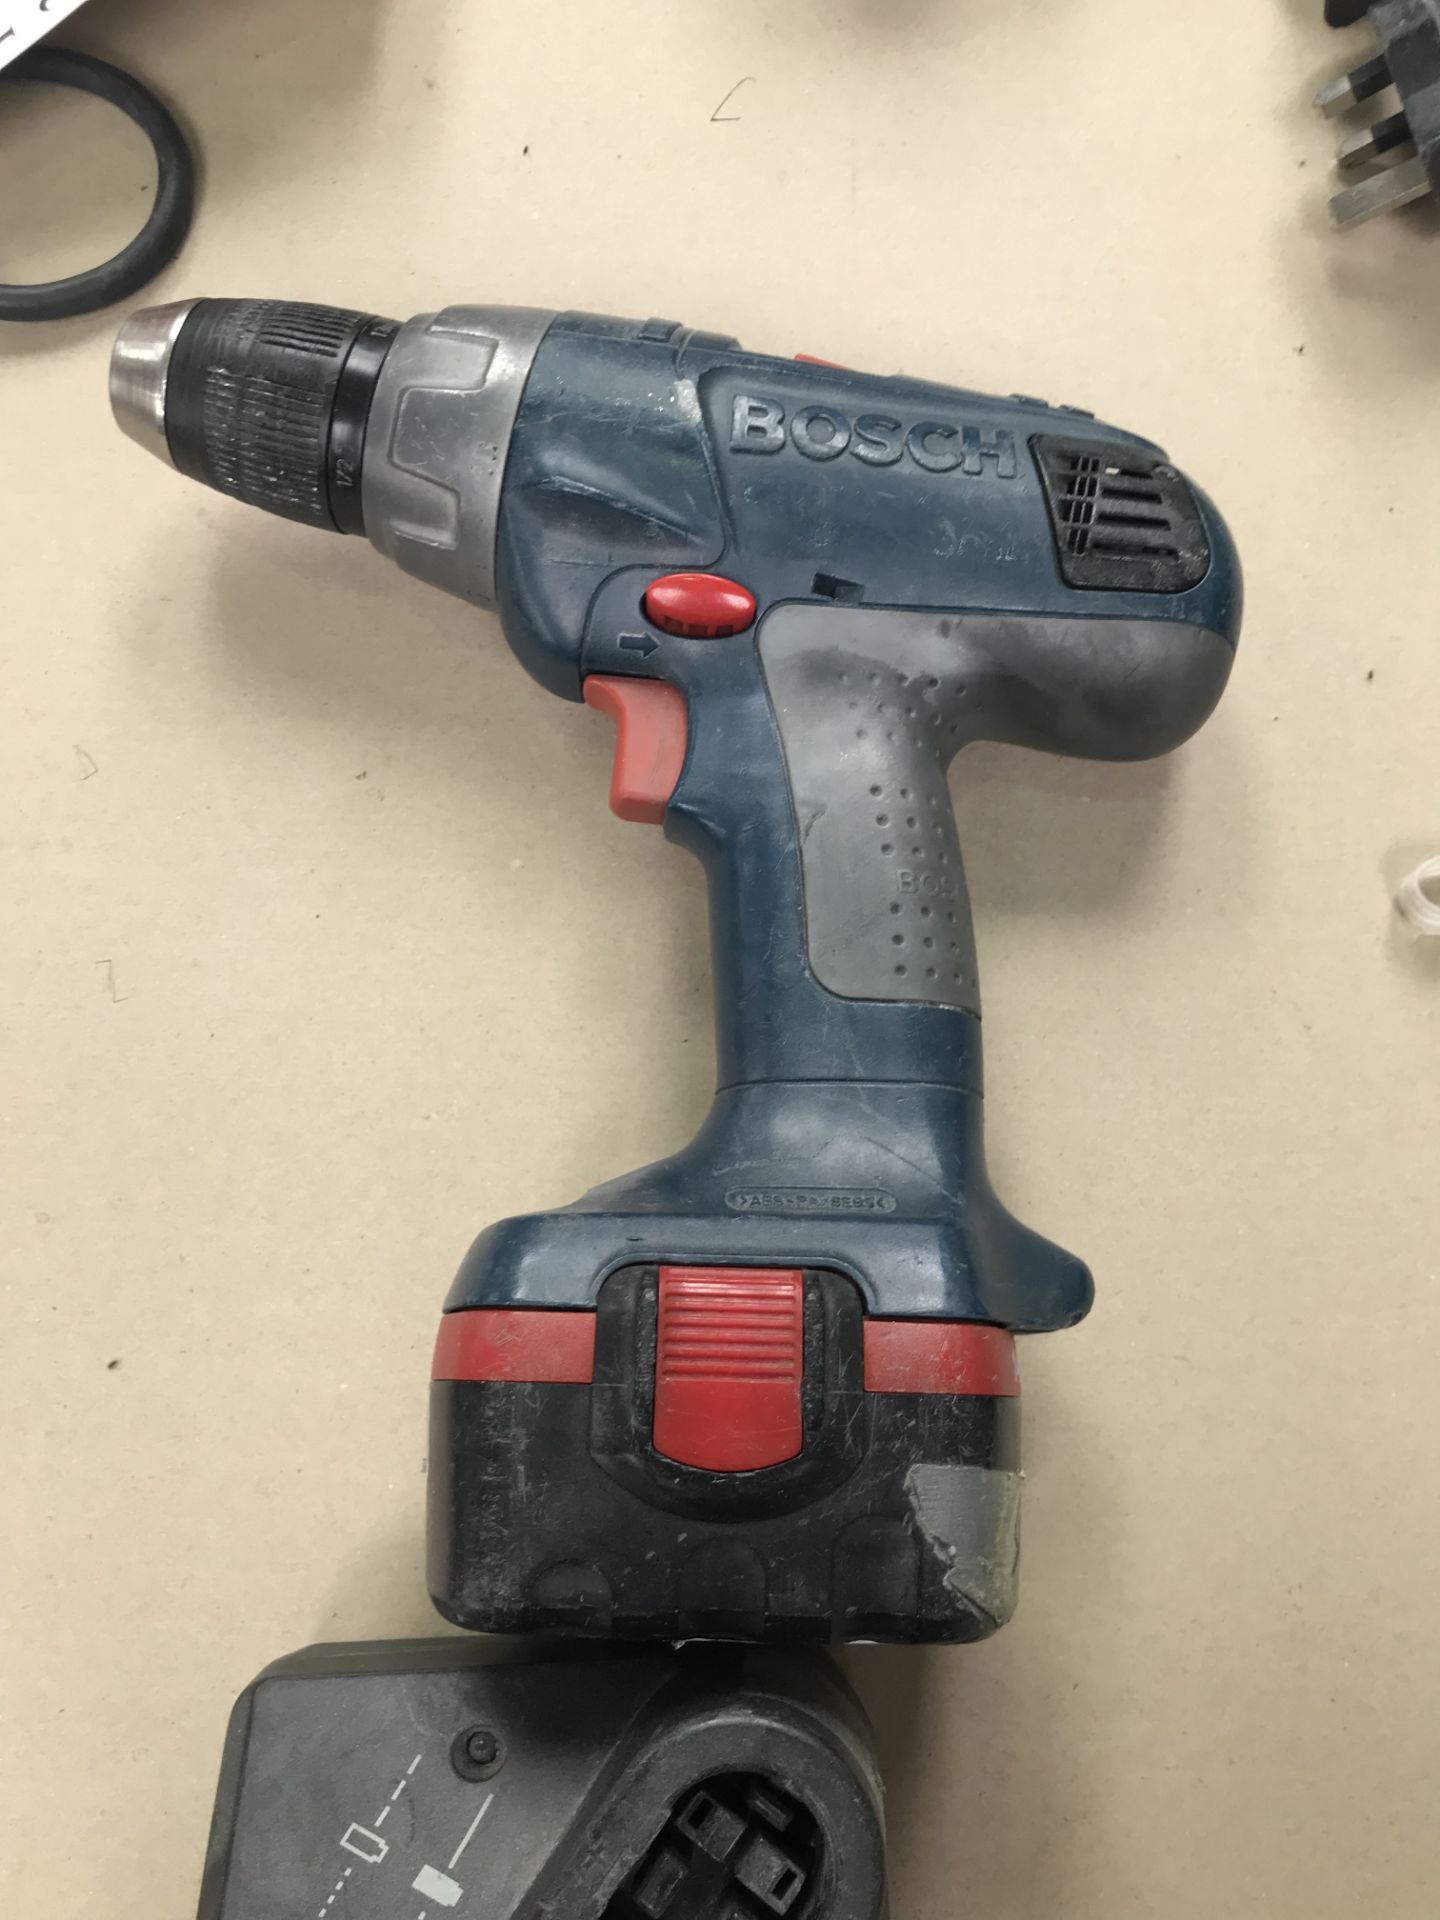 Bosch Power Drill w/ Charging Station - No sticker for model - Image 2 of 4